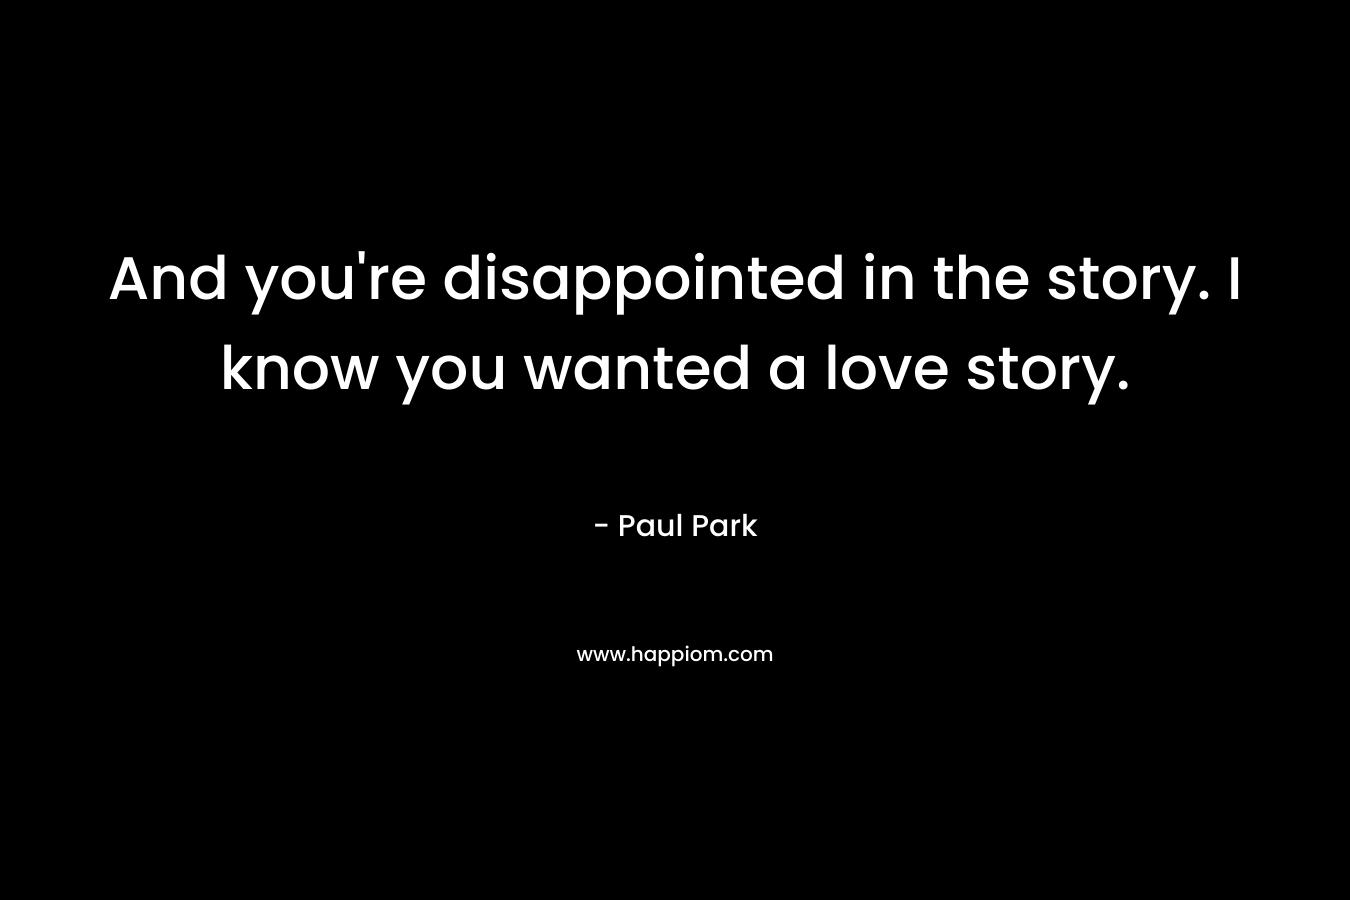 And you’re disappointed in the story. I know you wanted a love story. – Paul Park